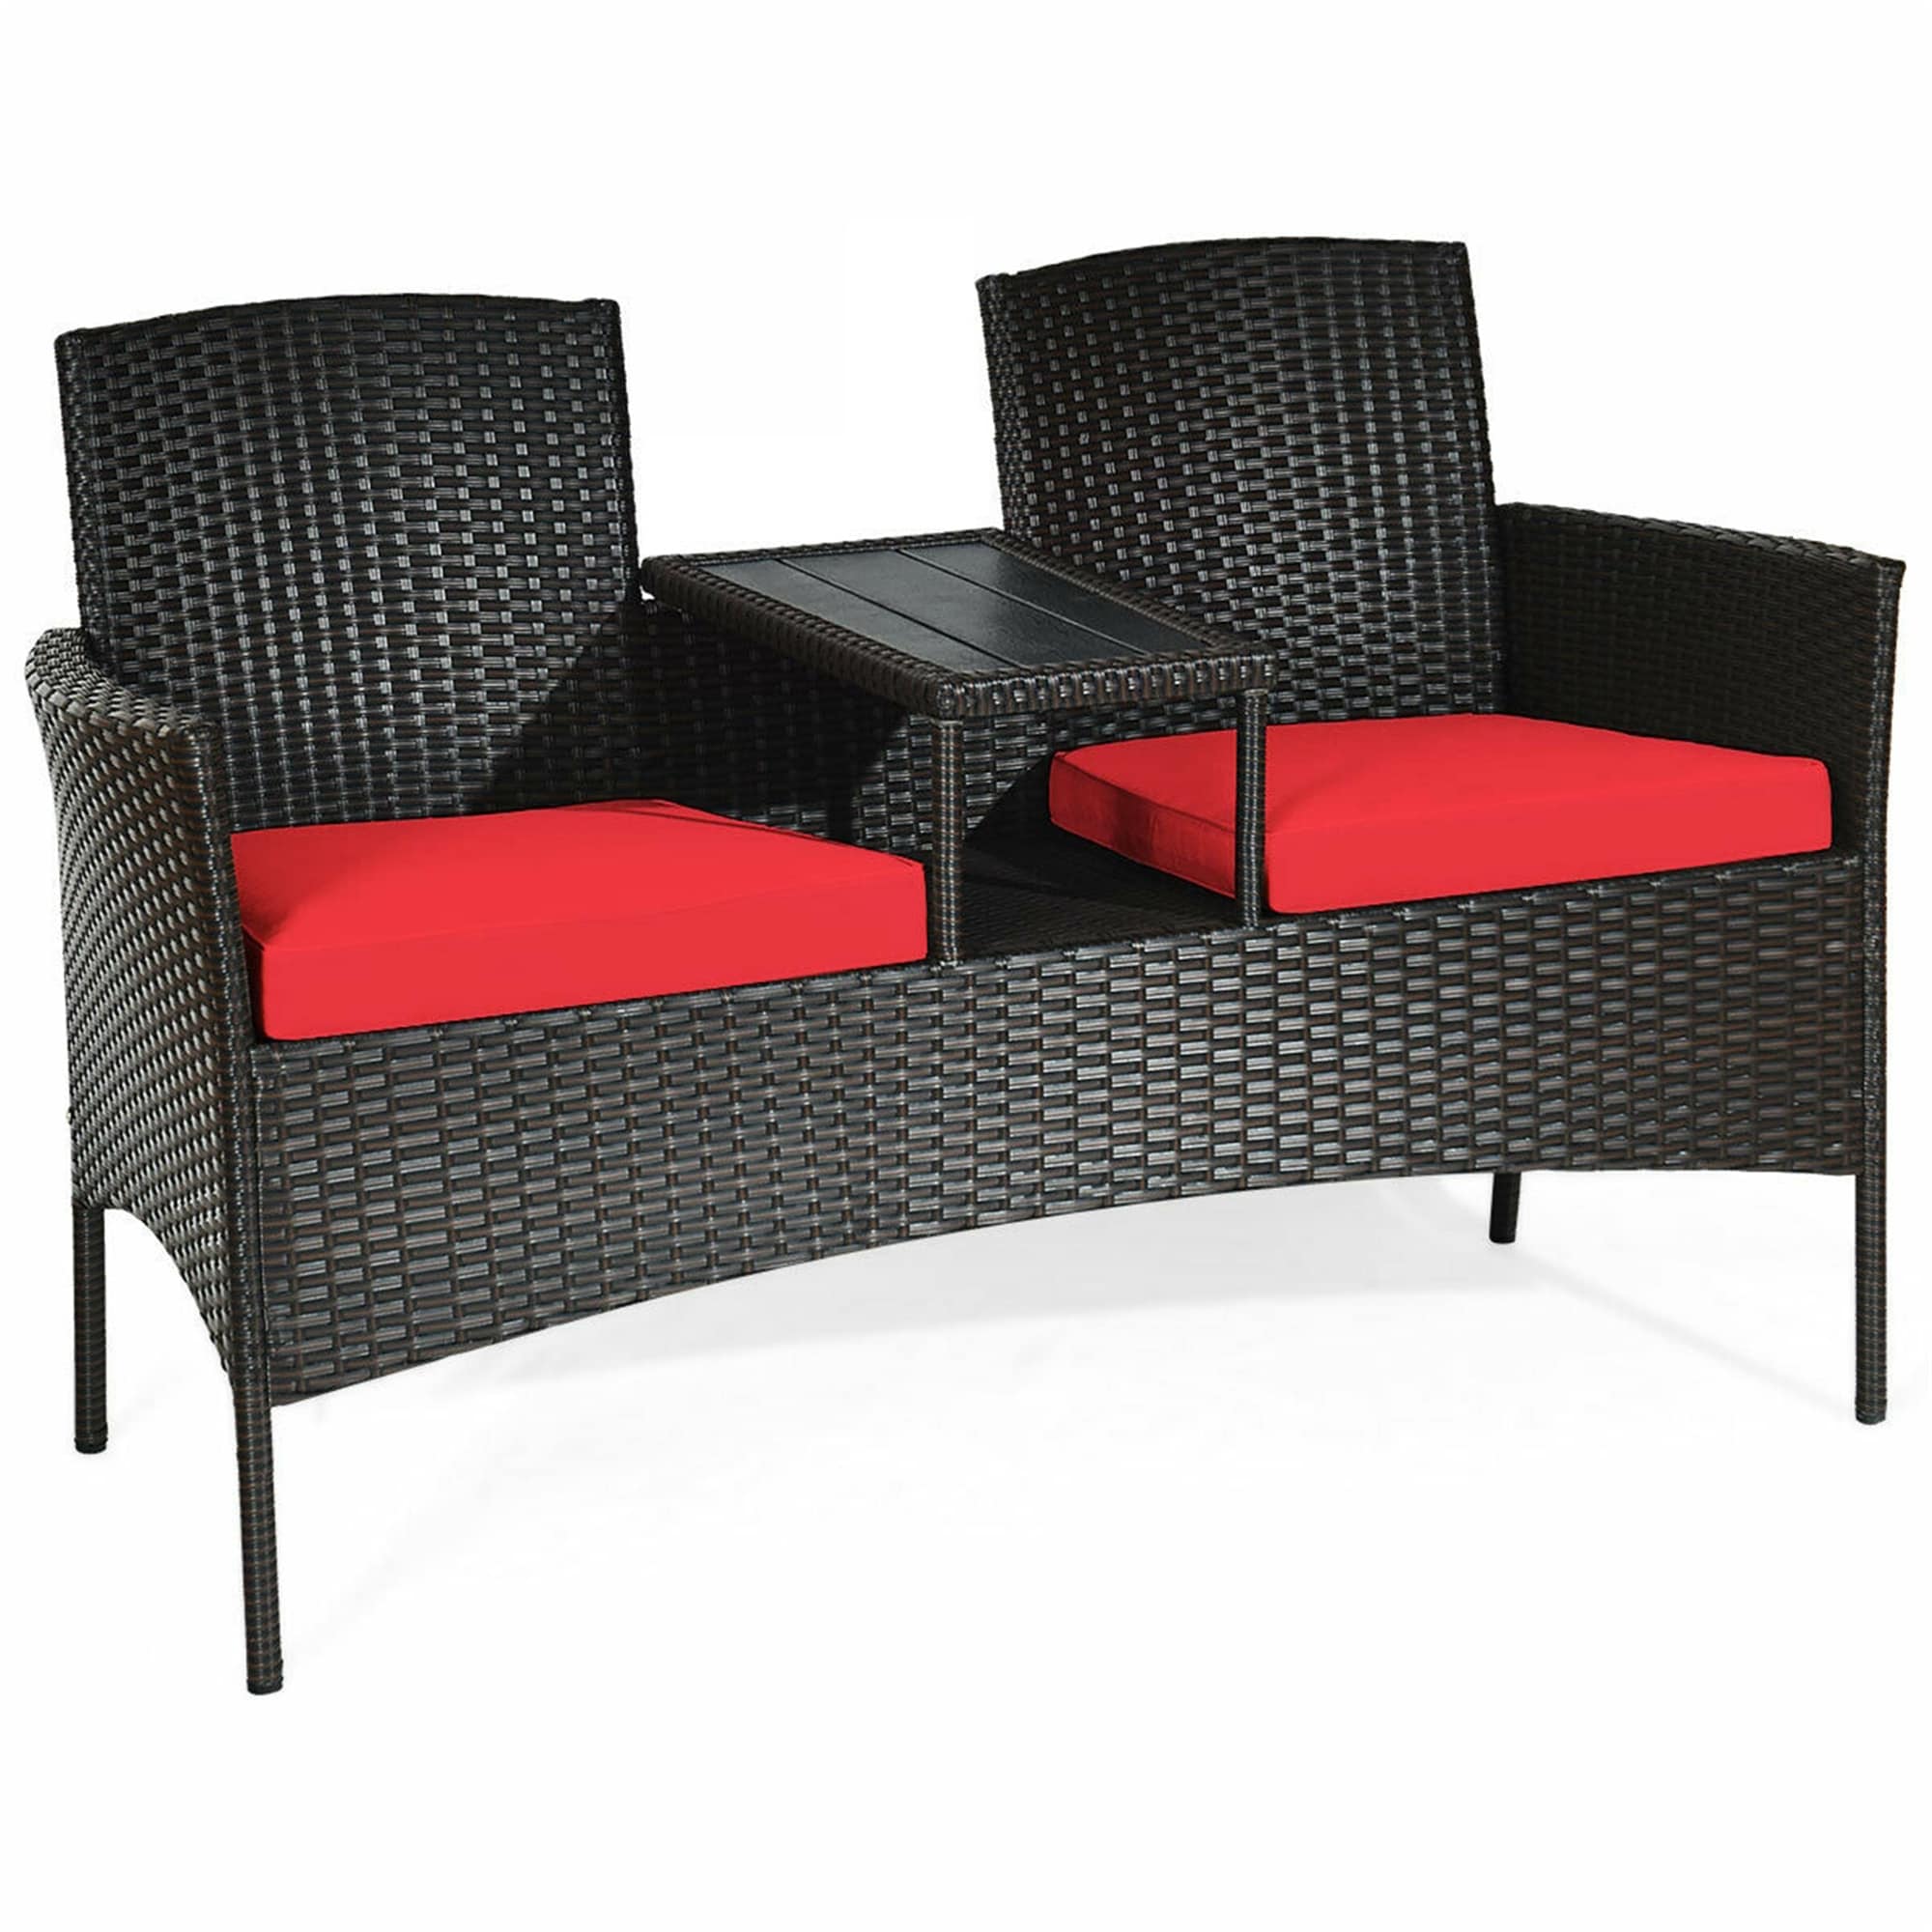 Rattan Double Seat Patio Conversation Set Loveseat Sofa With Cushions